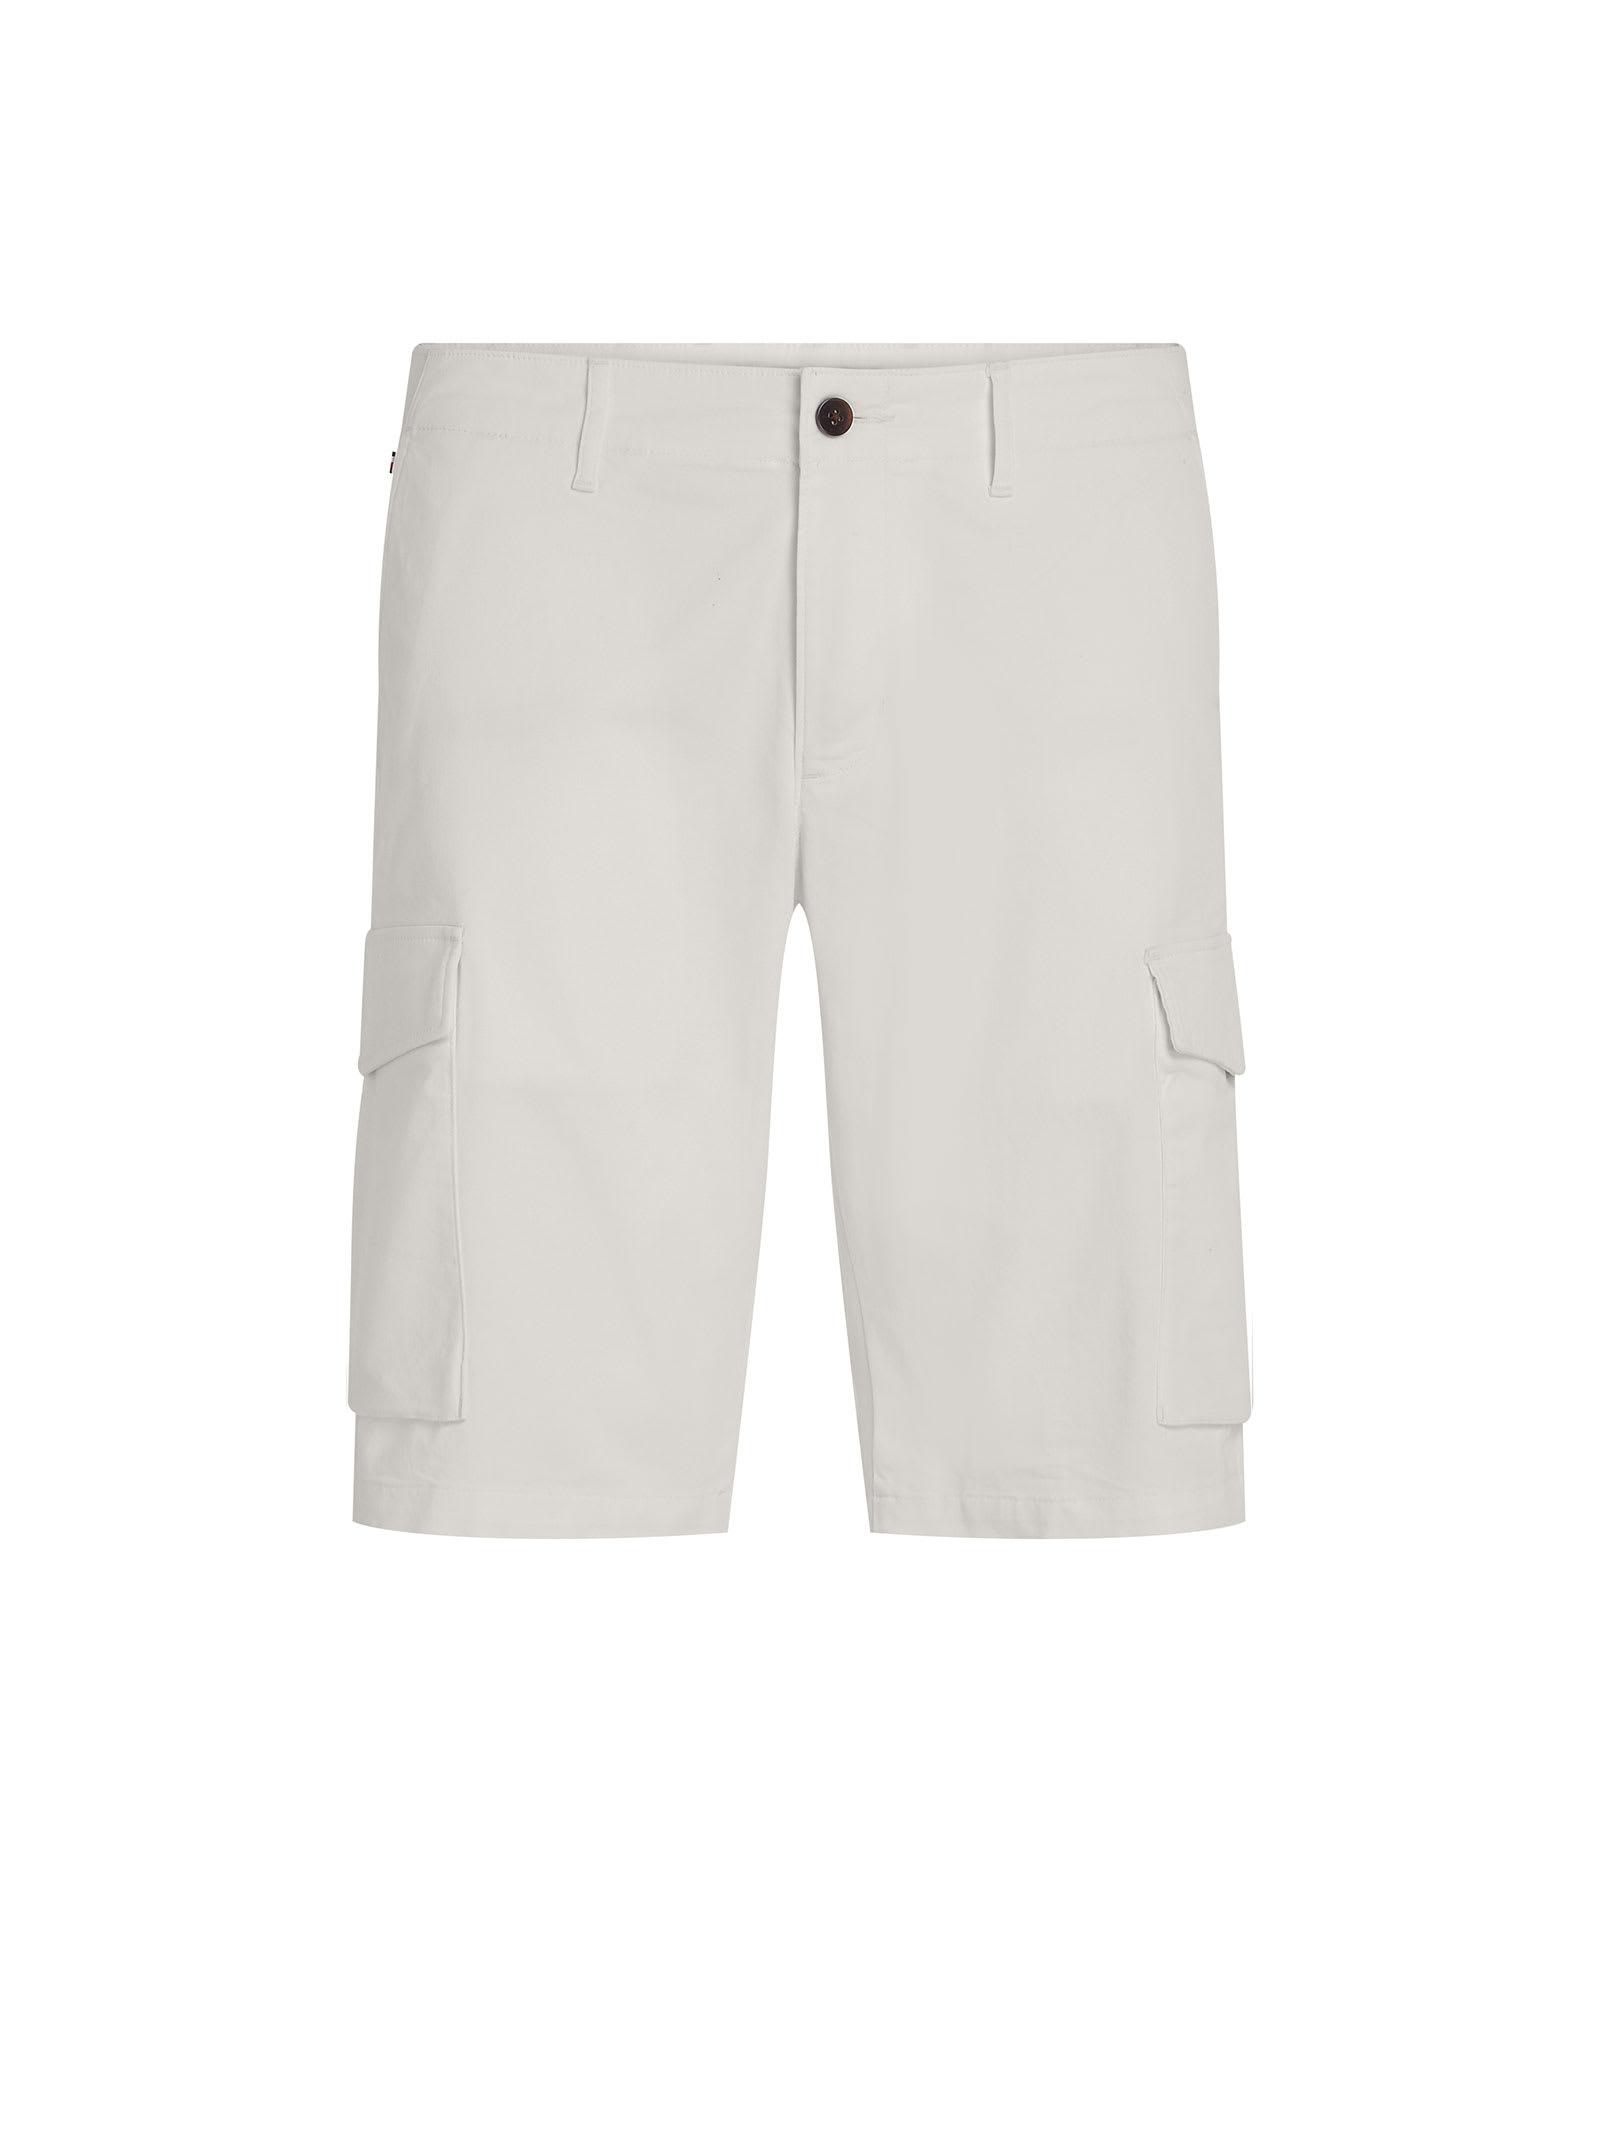 Tommy Hilfiger Twill Shorts With Cargo Pockets in White for Men | Lyst